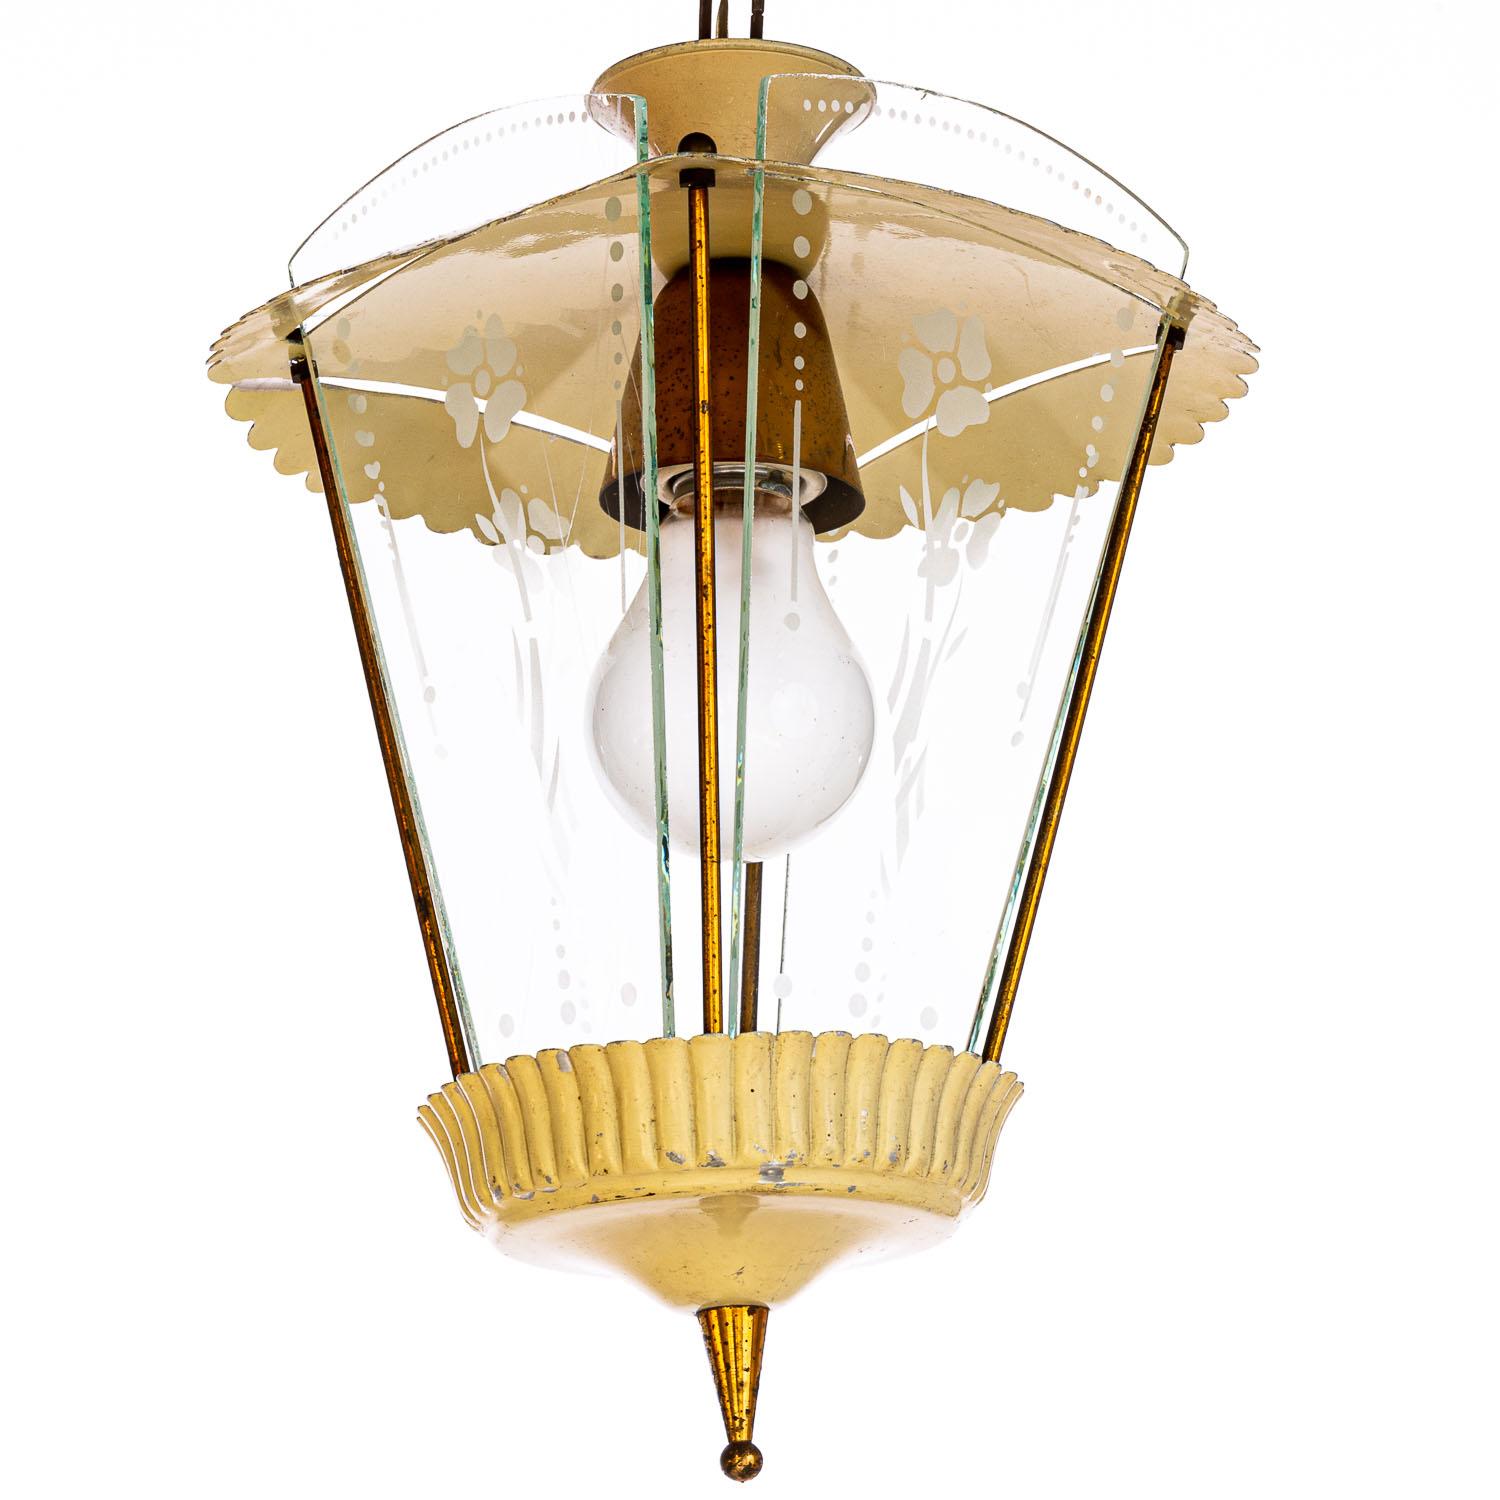 Lantern consists of four glass slide-in panels, a frame and one E27 lightbulb.